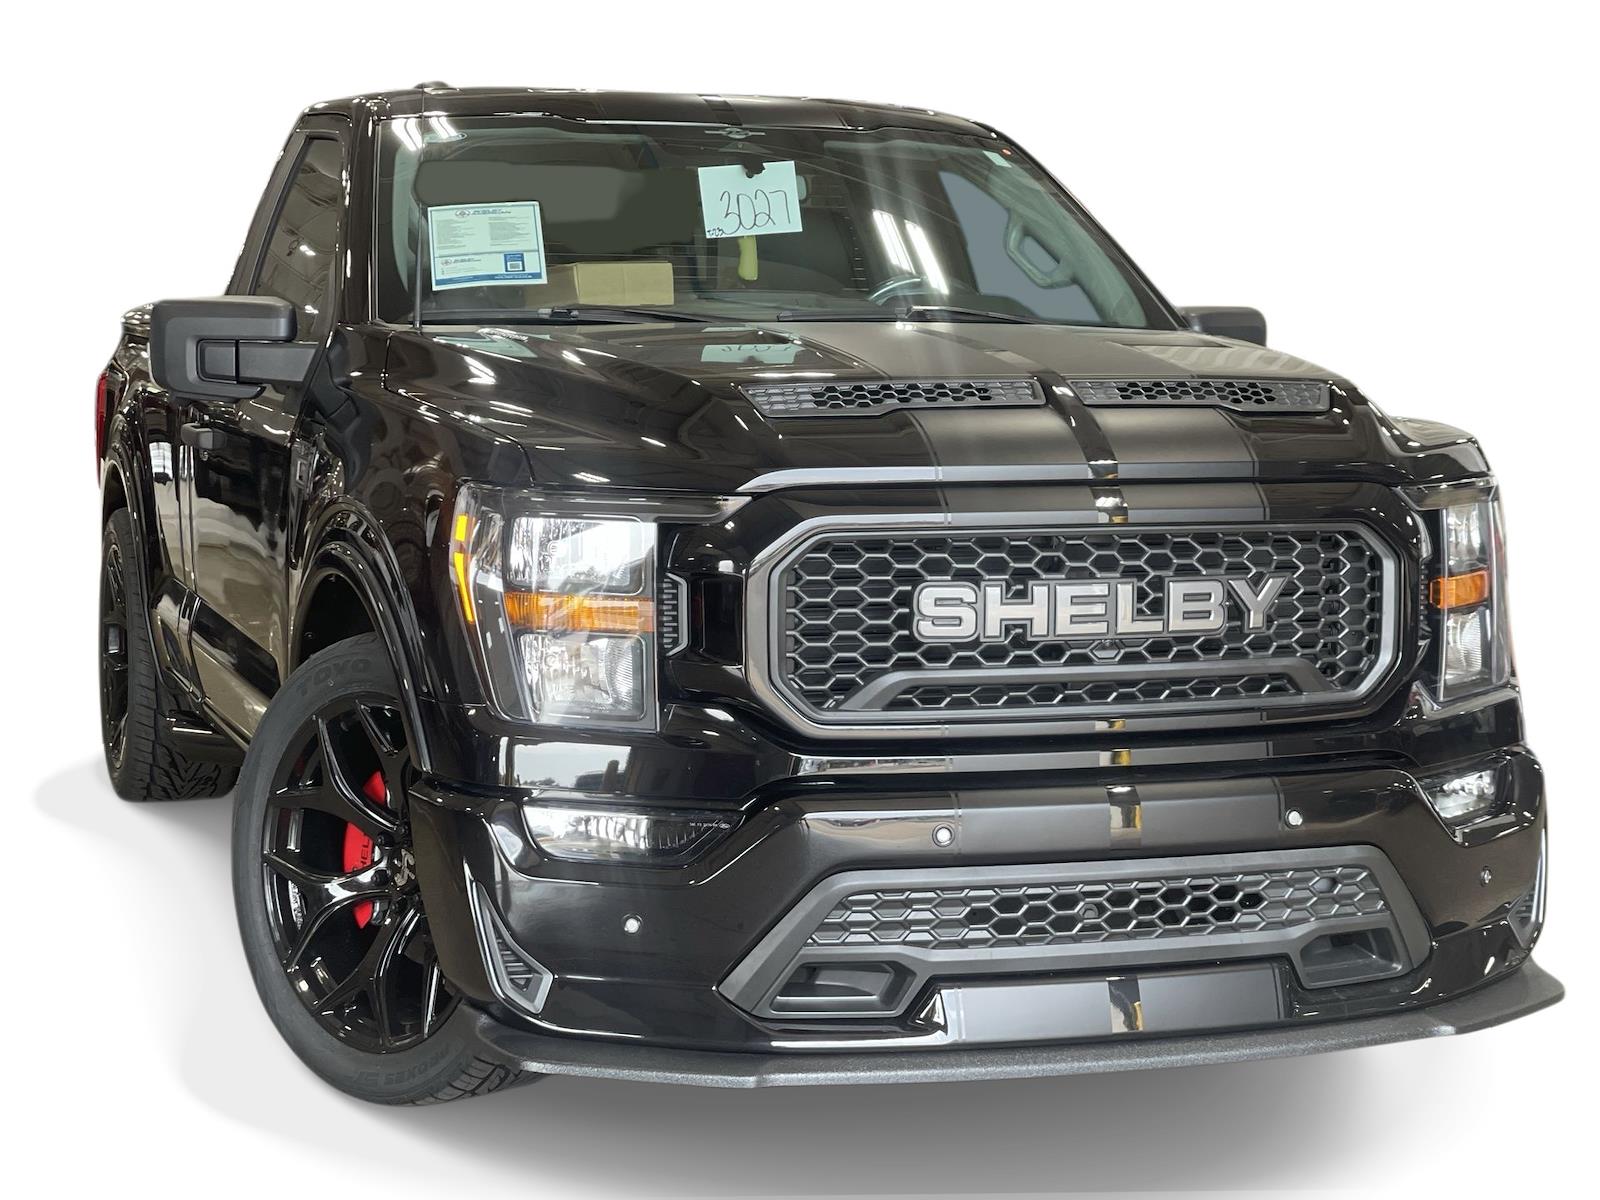 Ford F-150 Shelby American Lifted Truck for sale in Wichita,KS.